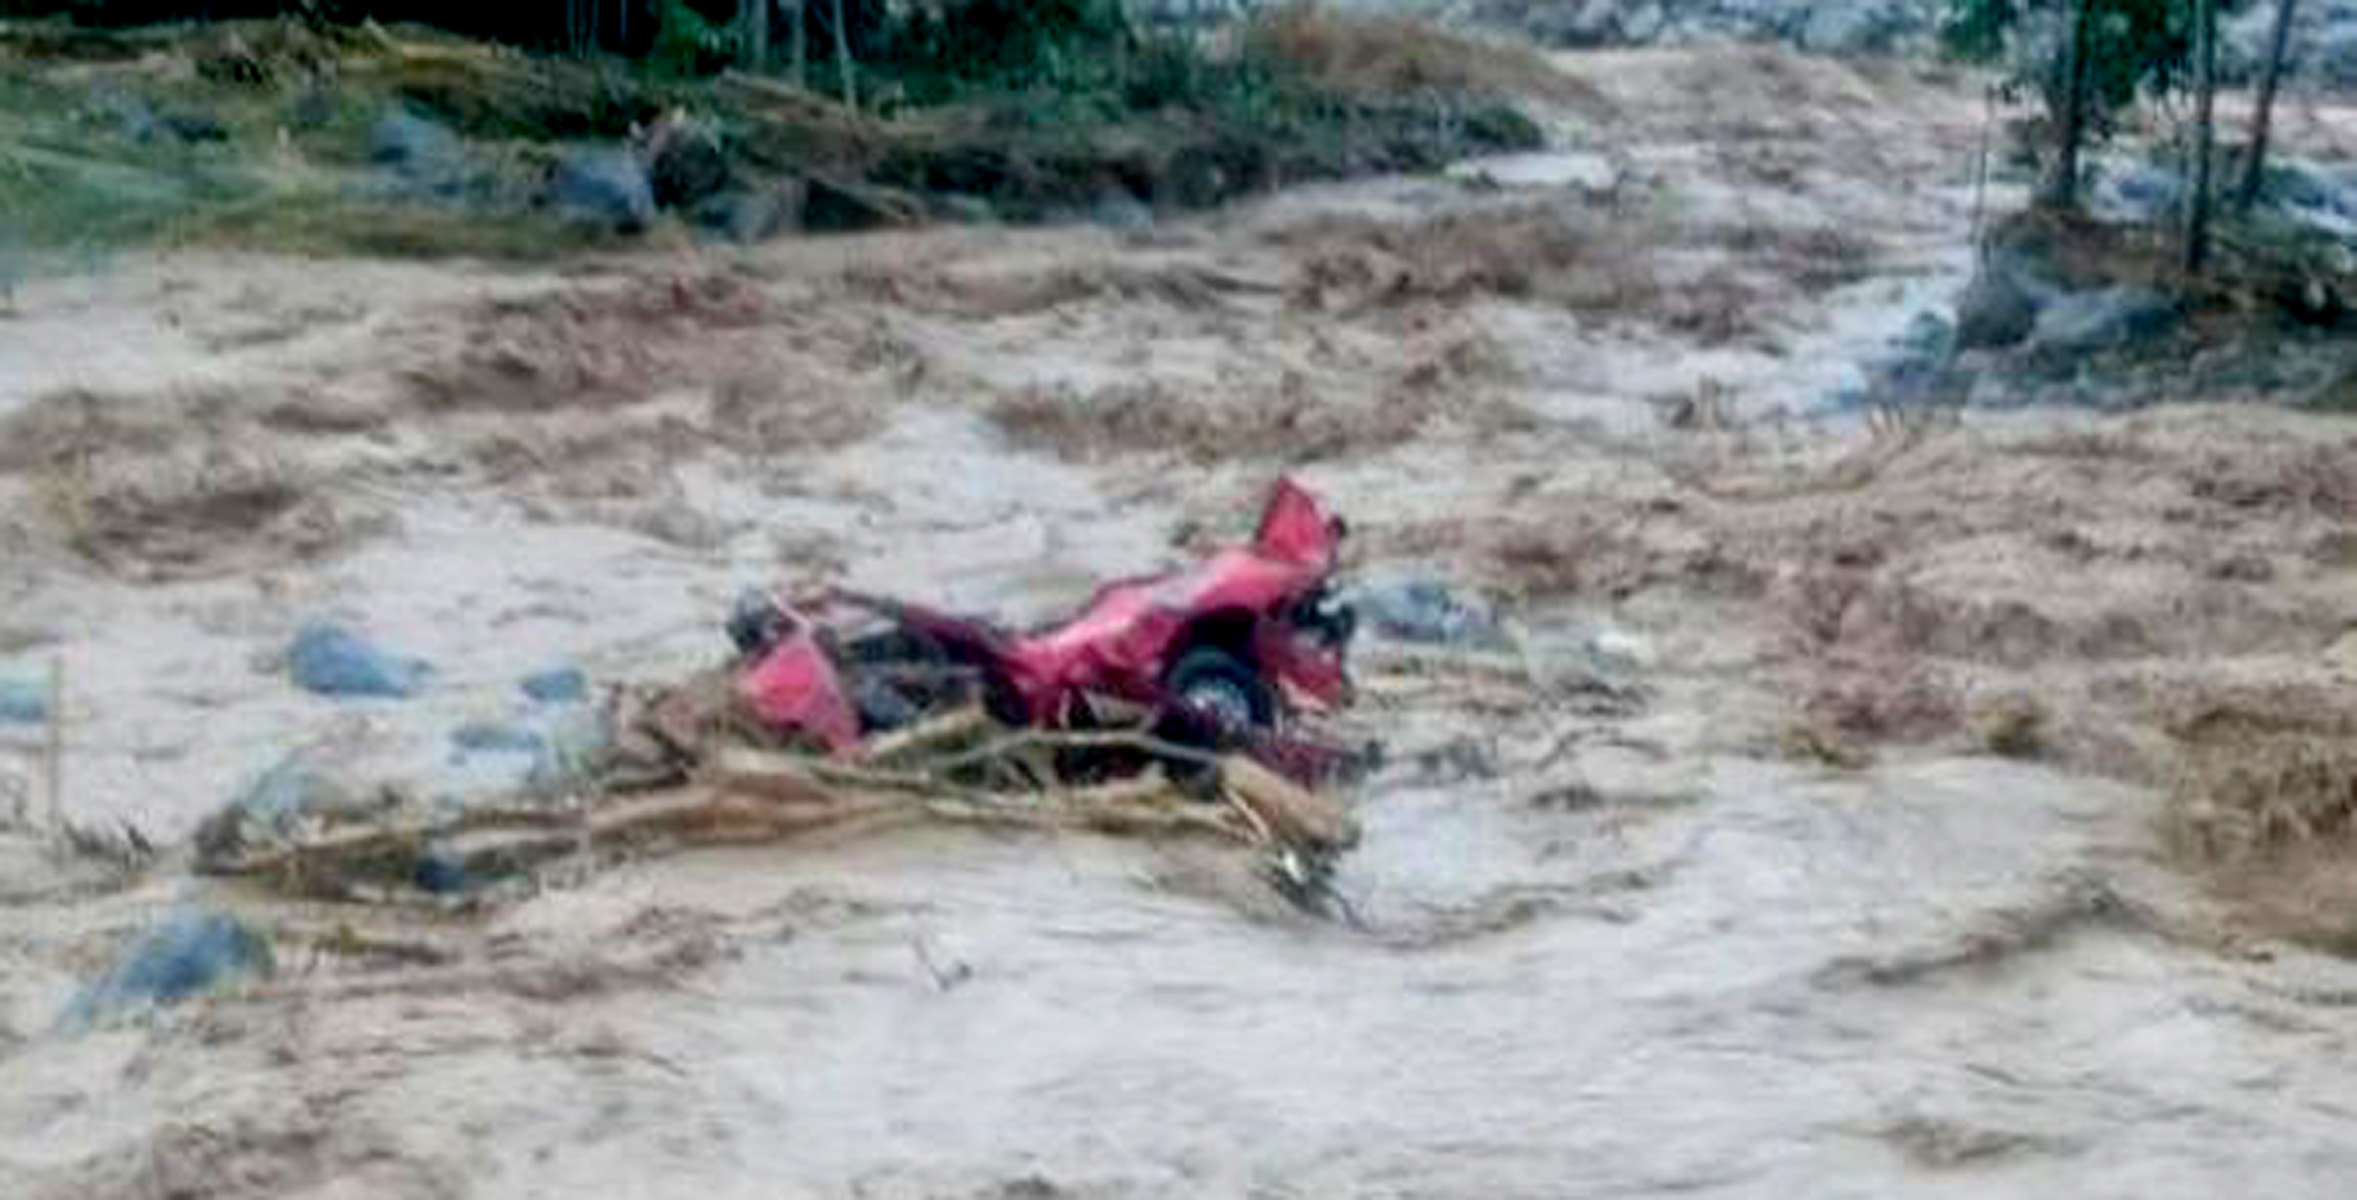 The storm prompted a declaration on Friday, March 20, that the Andean province of Bolívar was in a state of emergency. Photo courtesy of Vinicio Coloma, prefect of Bolívar.